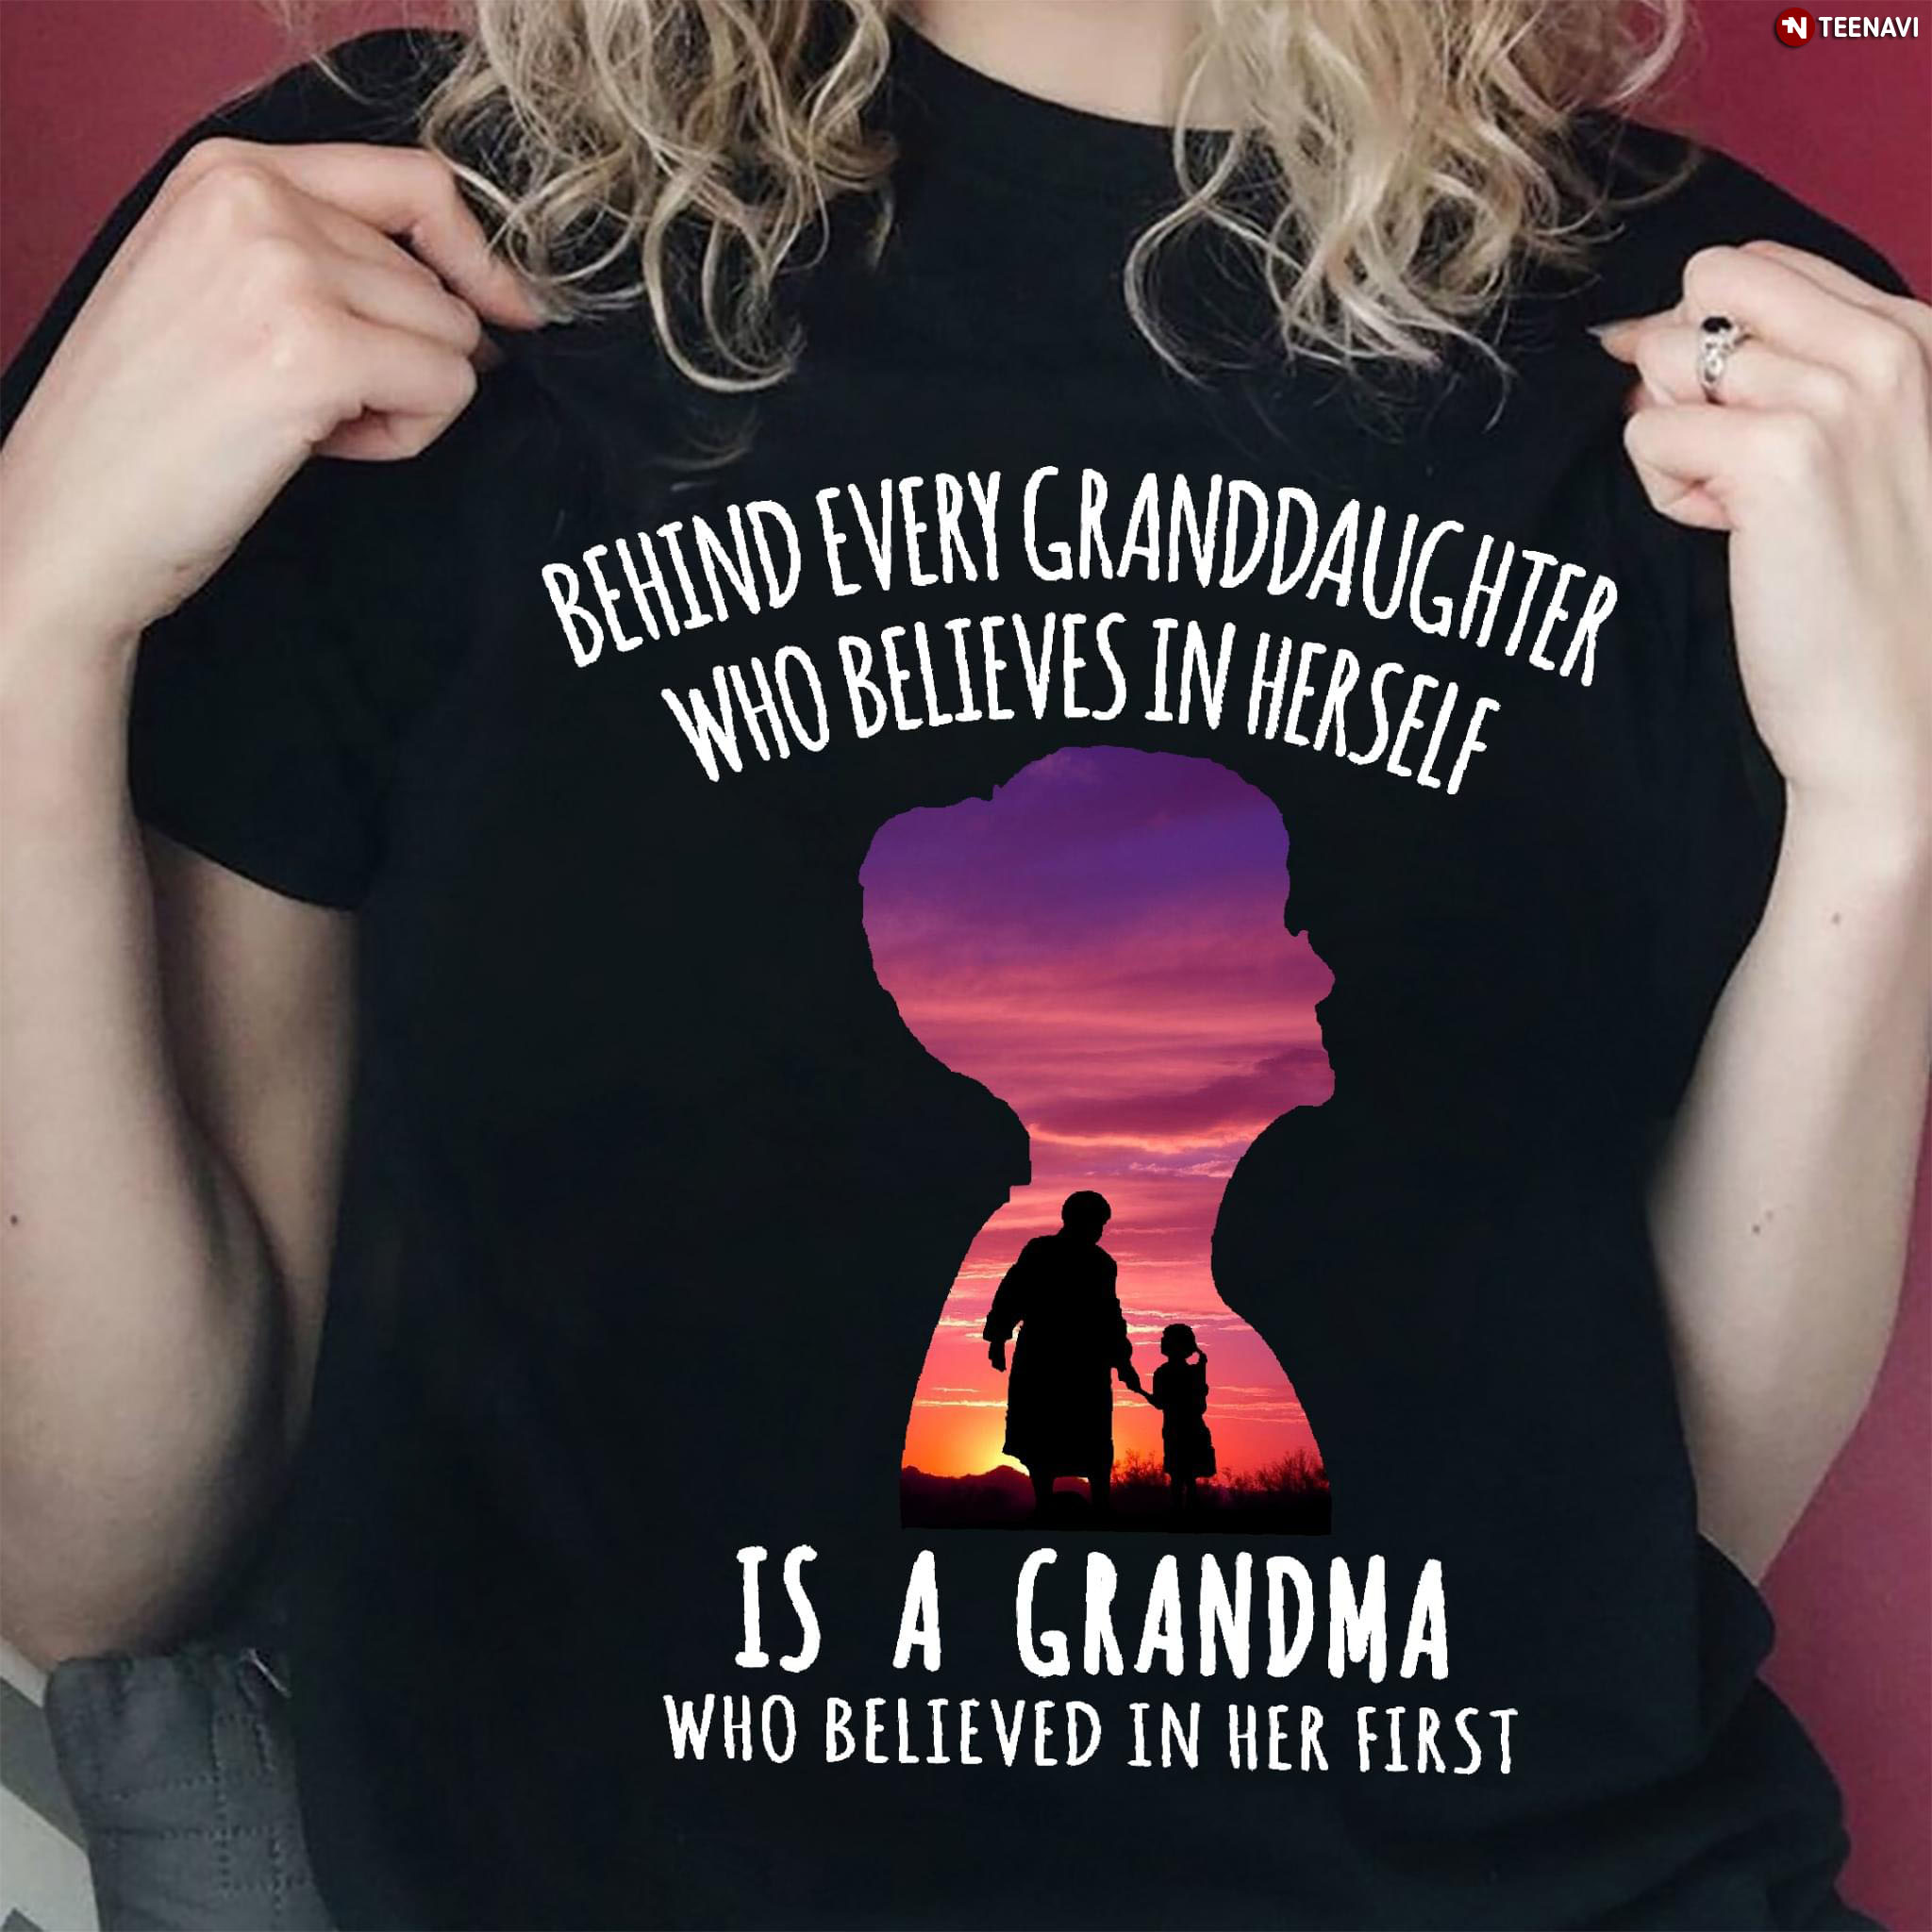 Behind Every Granddaughter Who Believes In Herself Is A Grandma Who Believed In Her First